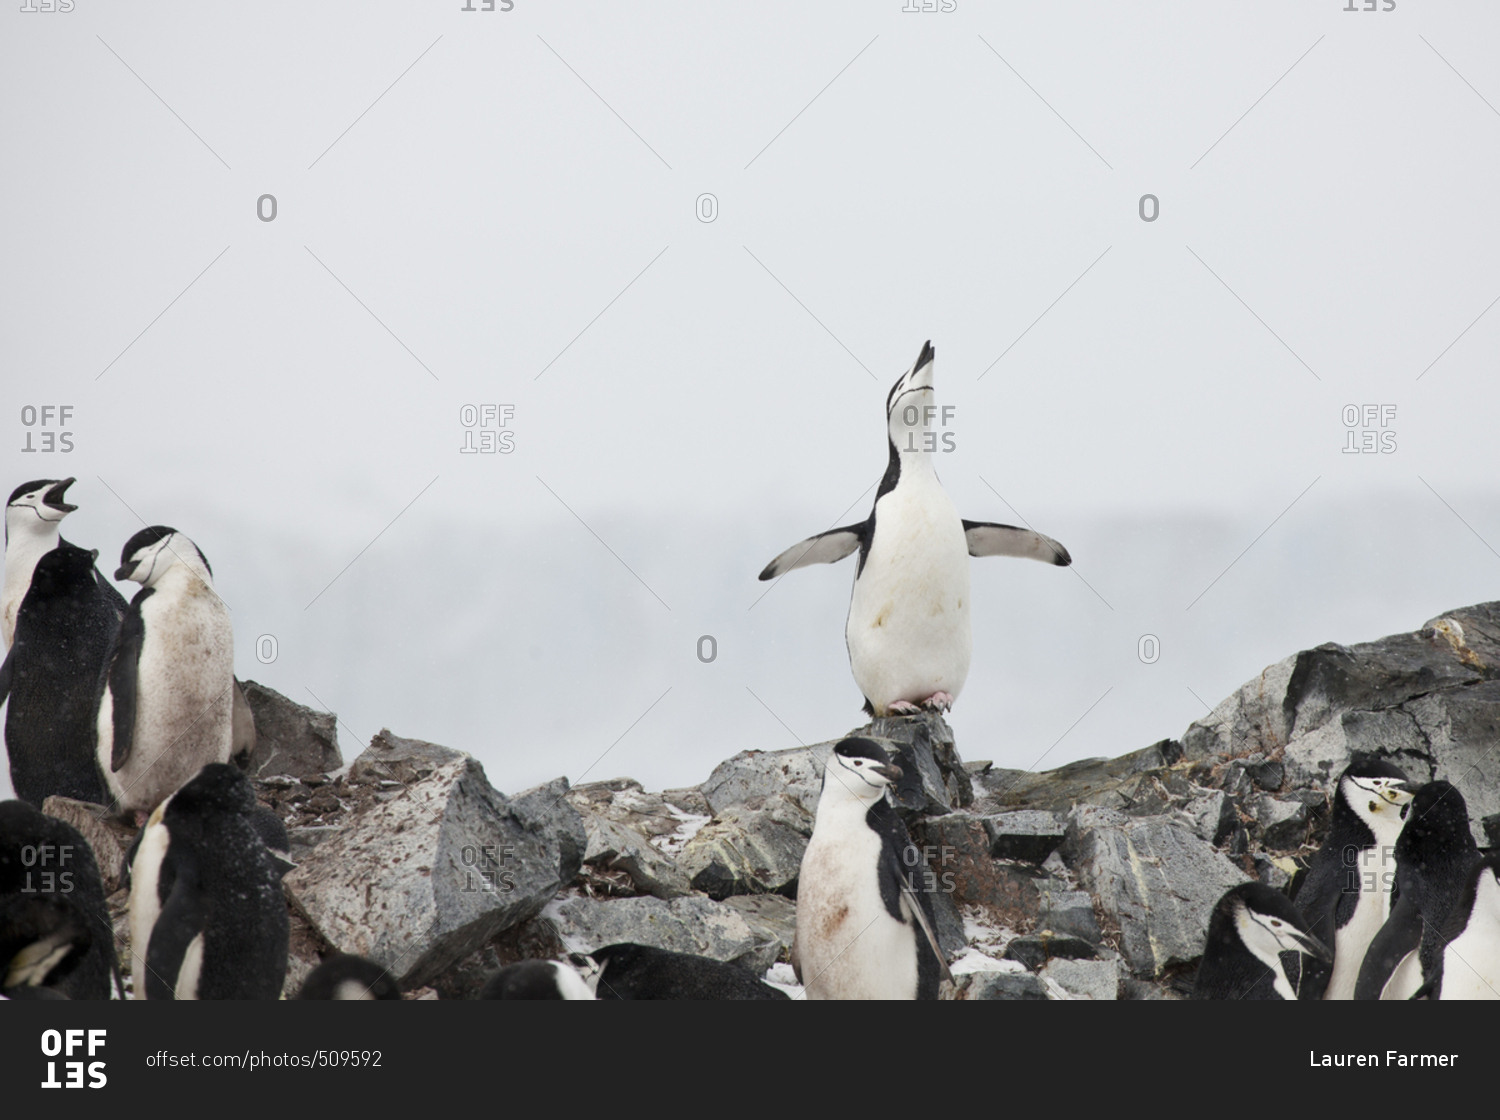 A chinstrap penguin displaying at a colony on Half Moon Island, South Shetland Islands